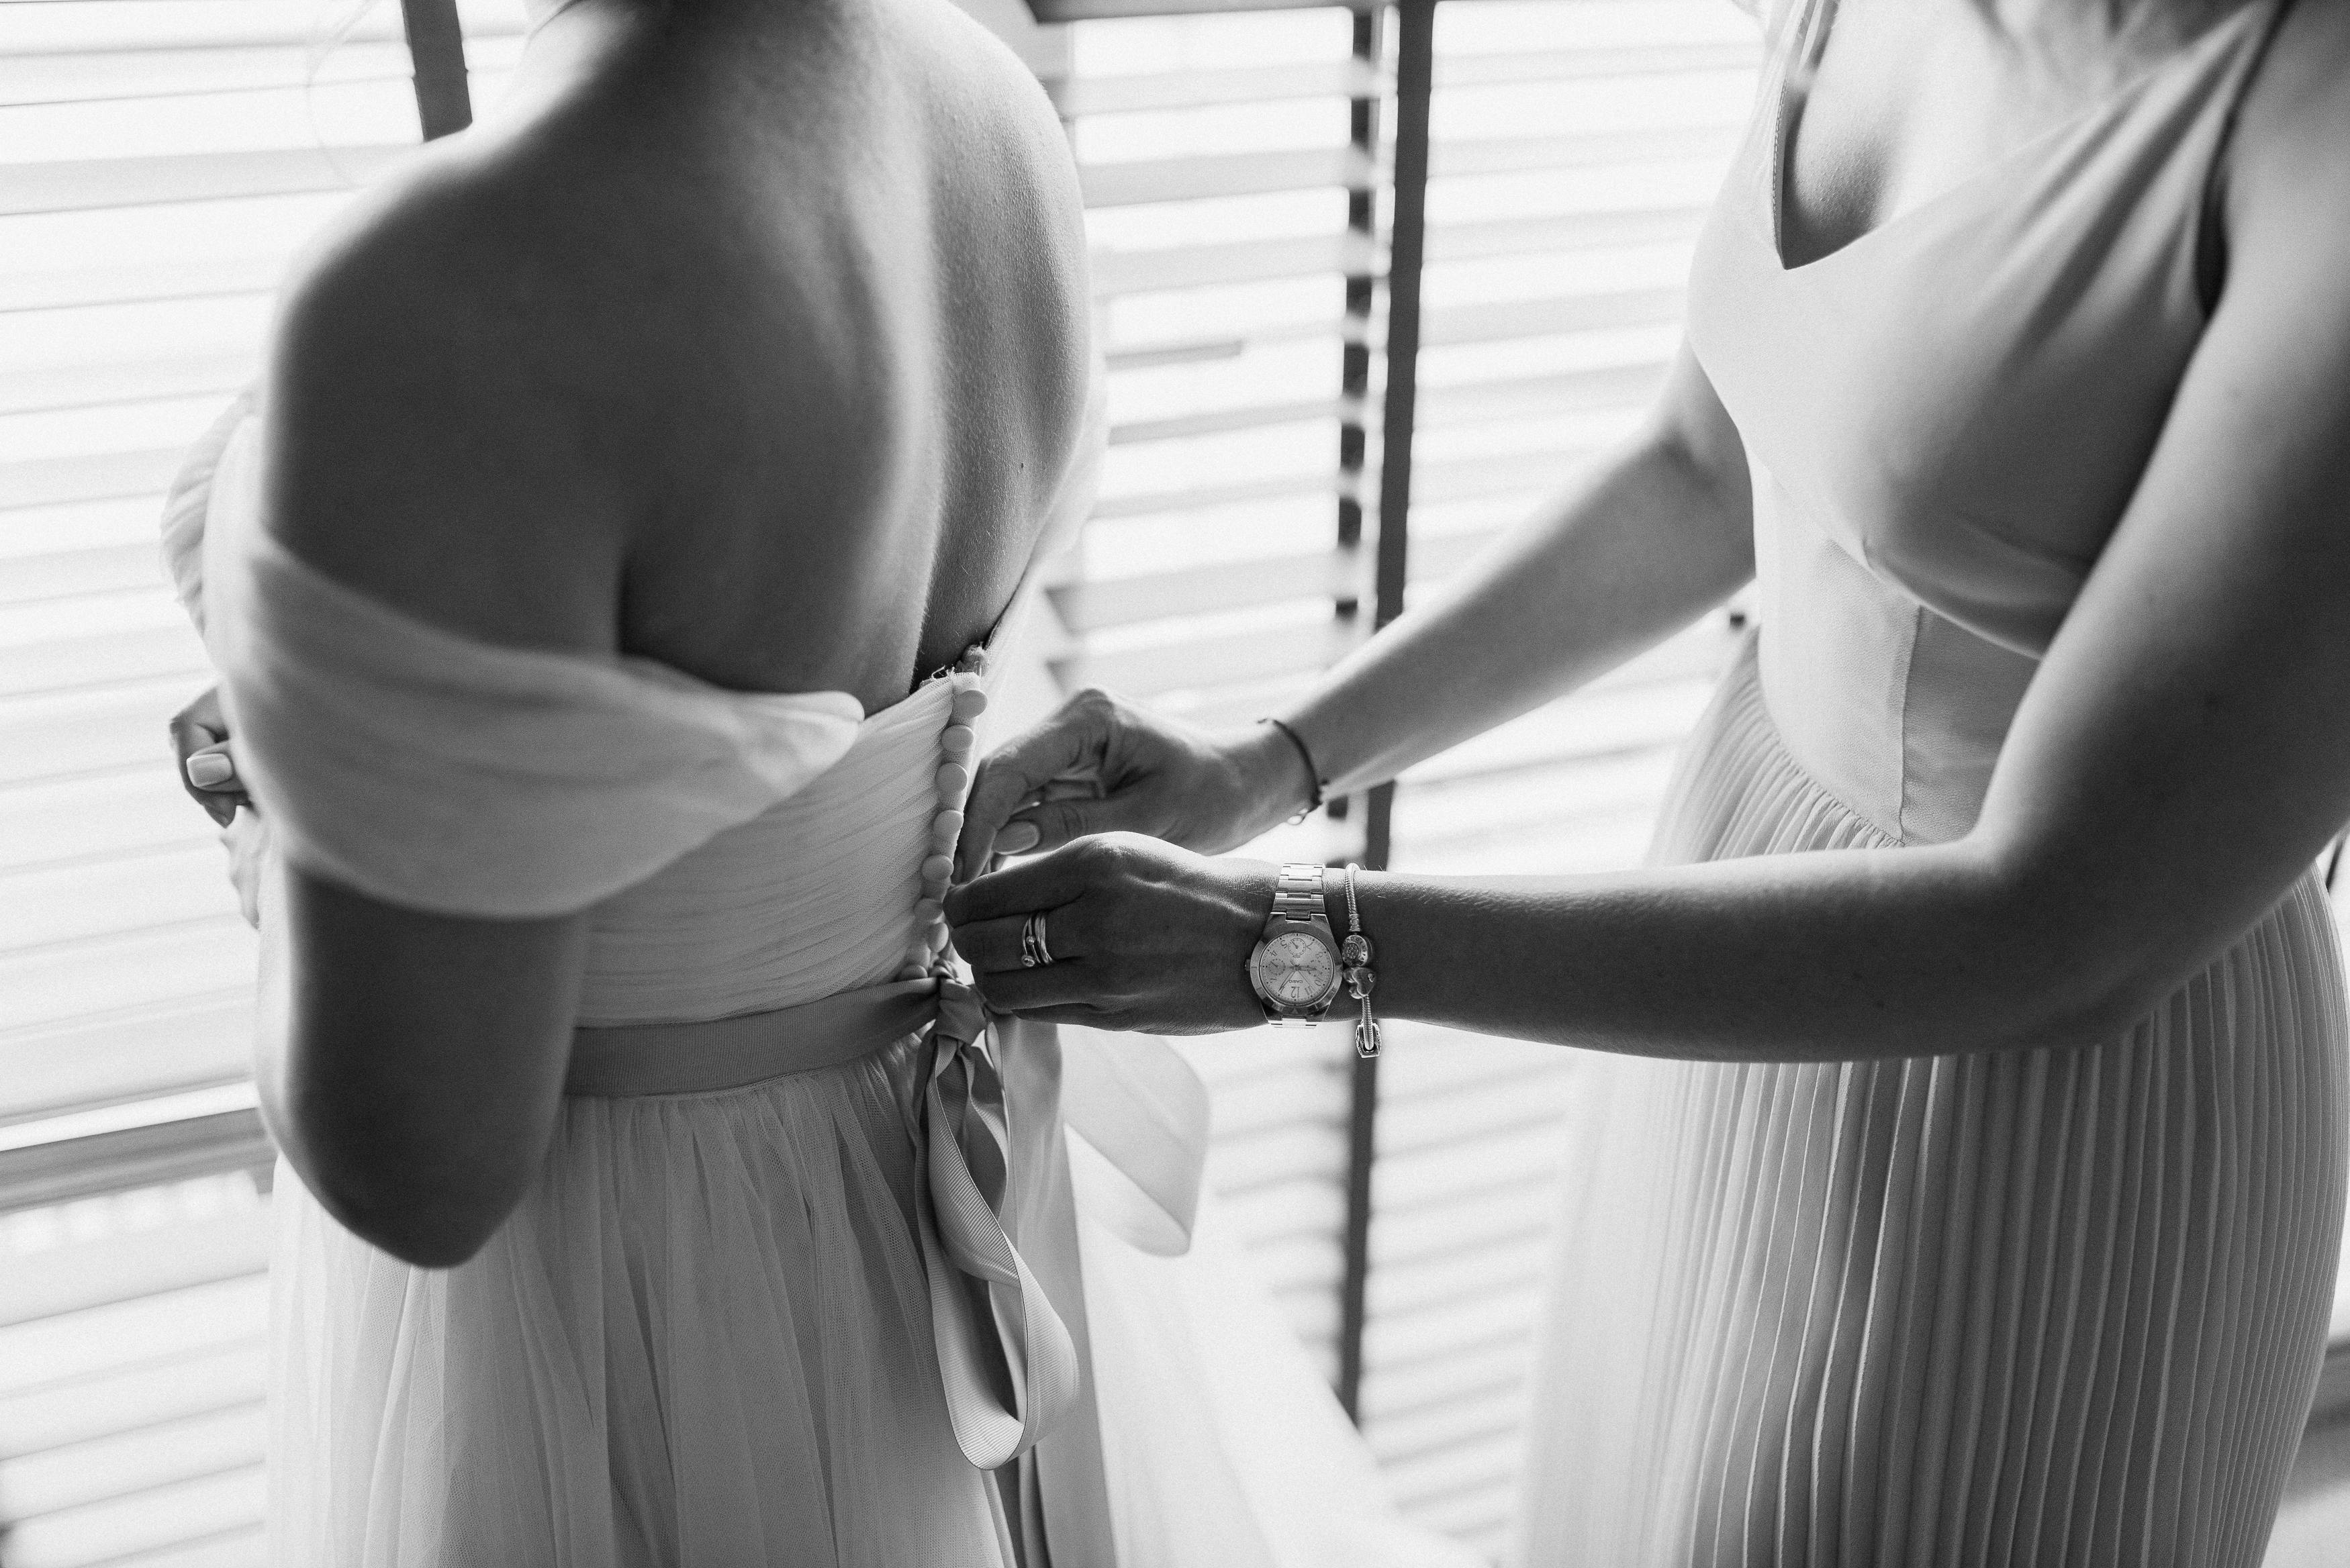 Admiring the fairy-tale elegance of the dresses | Source: Pexels